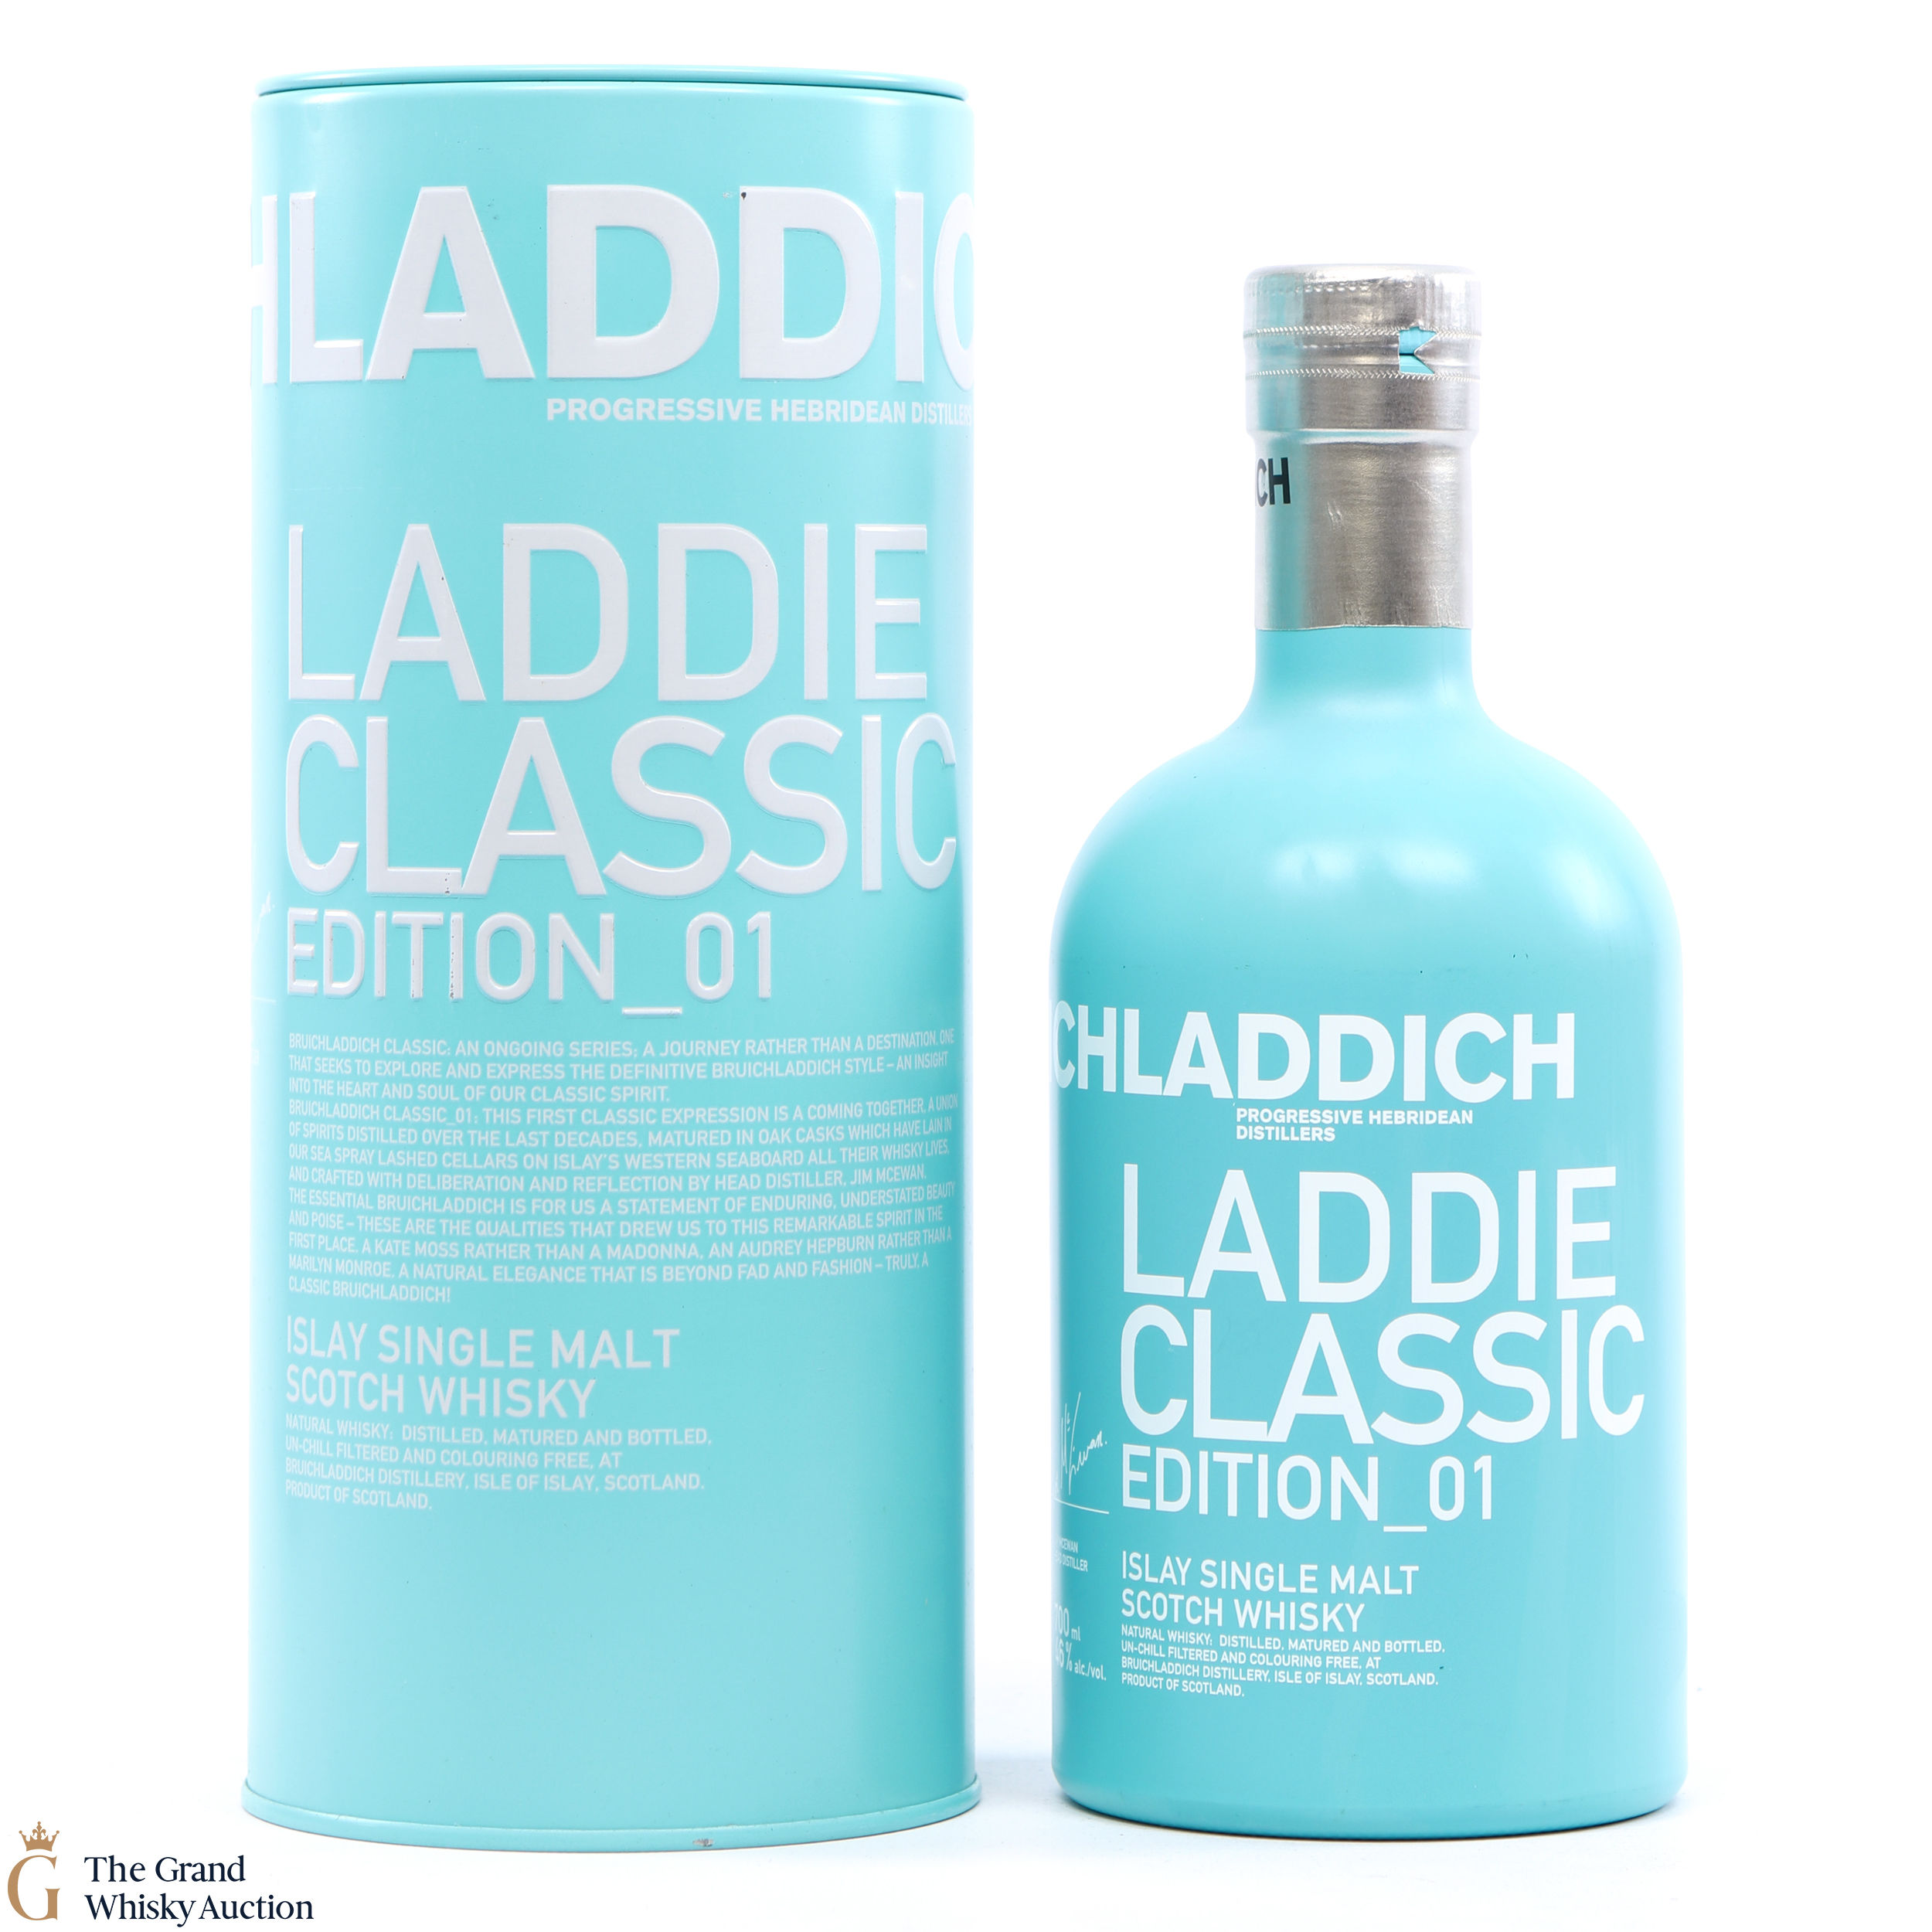 Bruichladdich Classic Laddie Edition 01 Auction The Grand Whisky